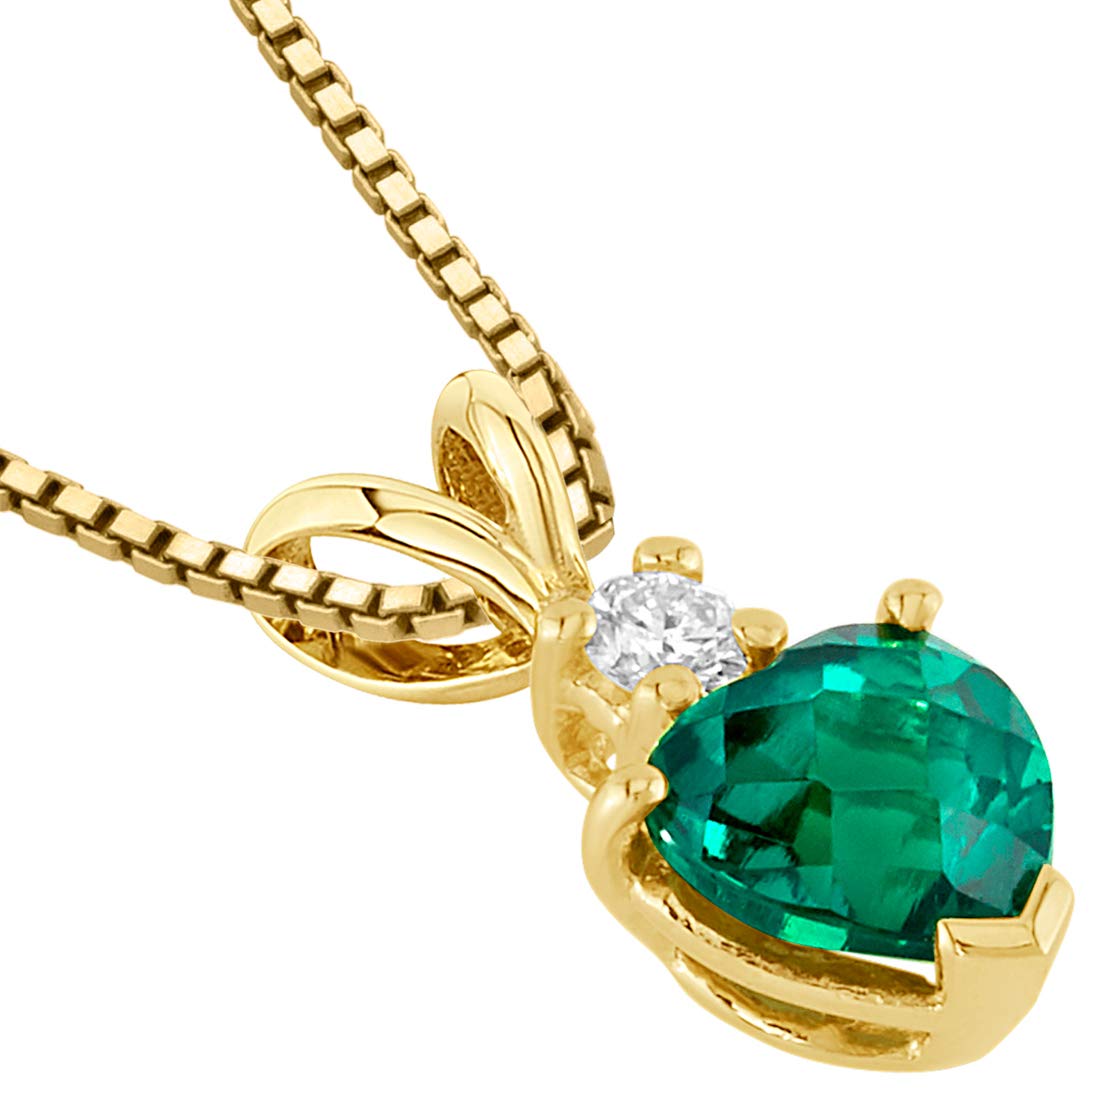 Peora Created Emerald with Genuine Diamond Pendant in 14 Karat Yellow Gold, Heart Shape Solitaire, 6mm